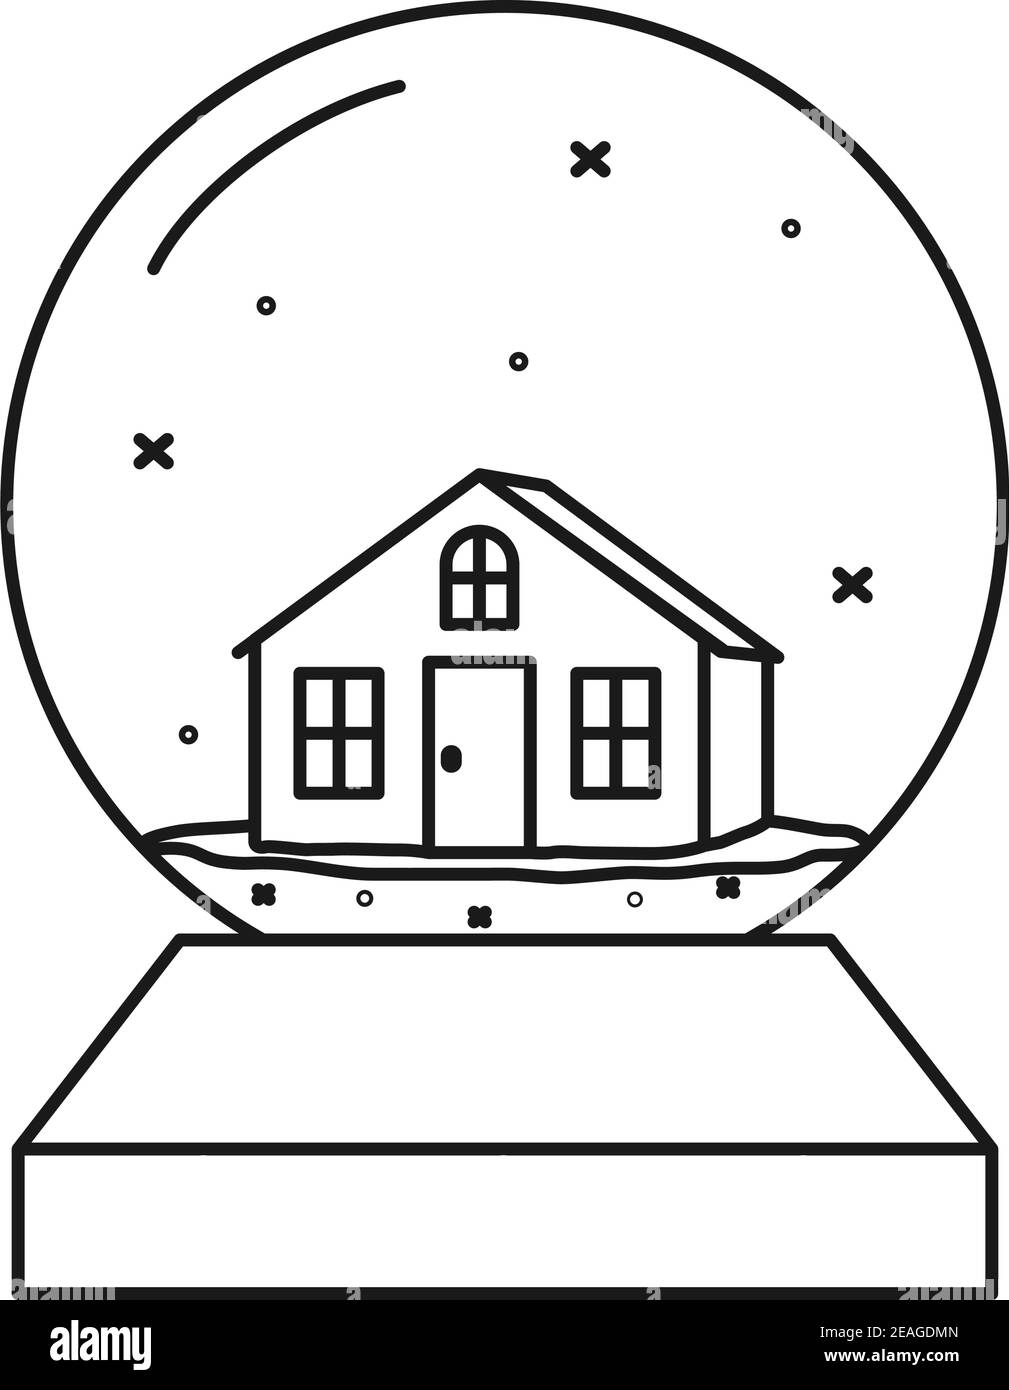 Line art black and white xmas glass ball. Small winter house toy. Christmas theme vector illustration for poster, label, gift card, coloring book deco Stock Vector